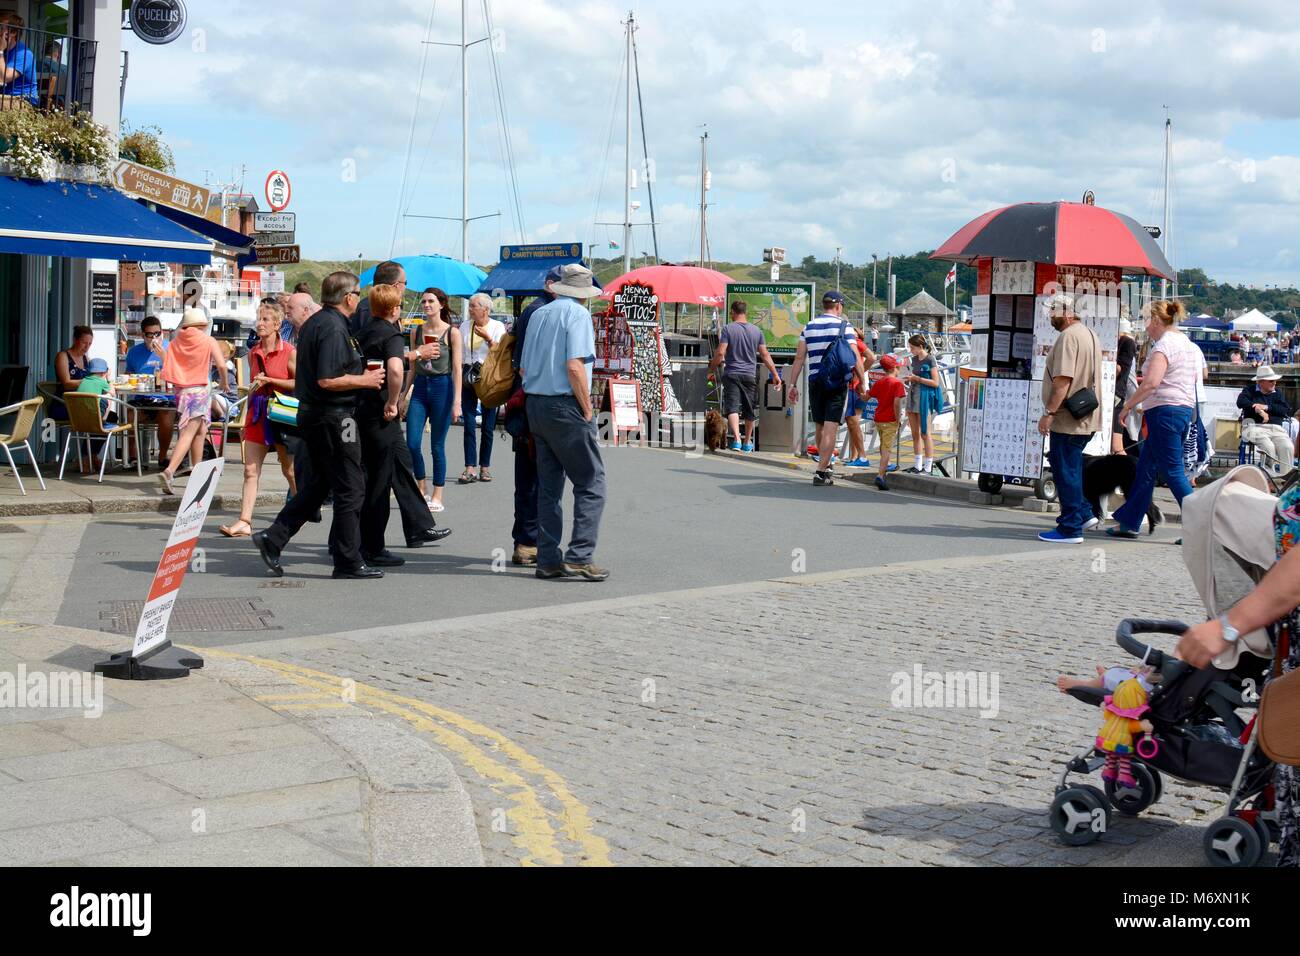 People on their holidays and visiting the town of Padstow, Cornwall, England, UK Stock Photo